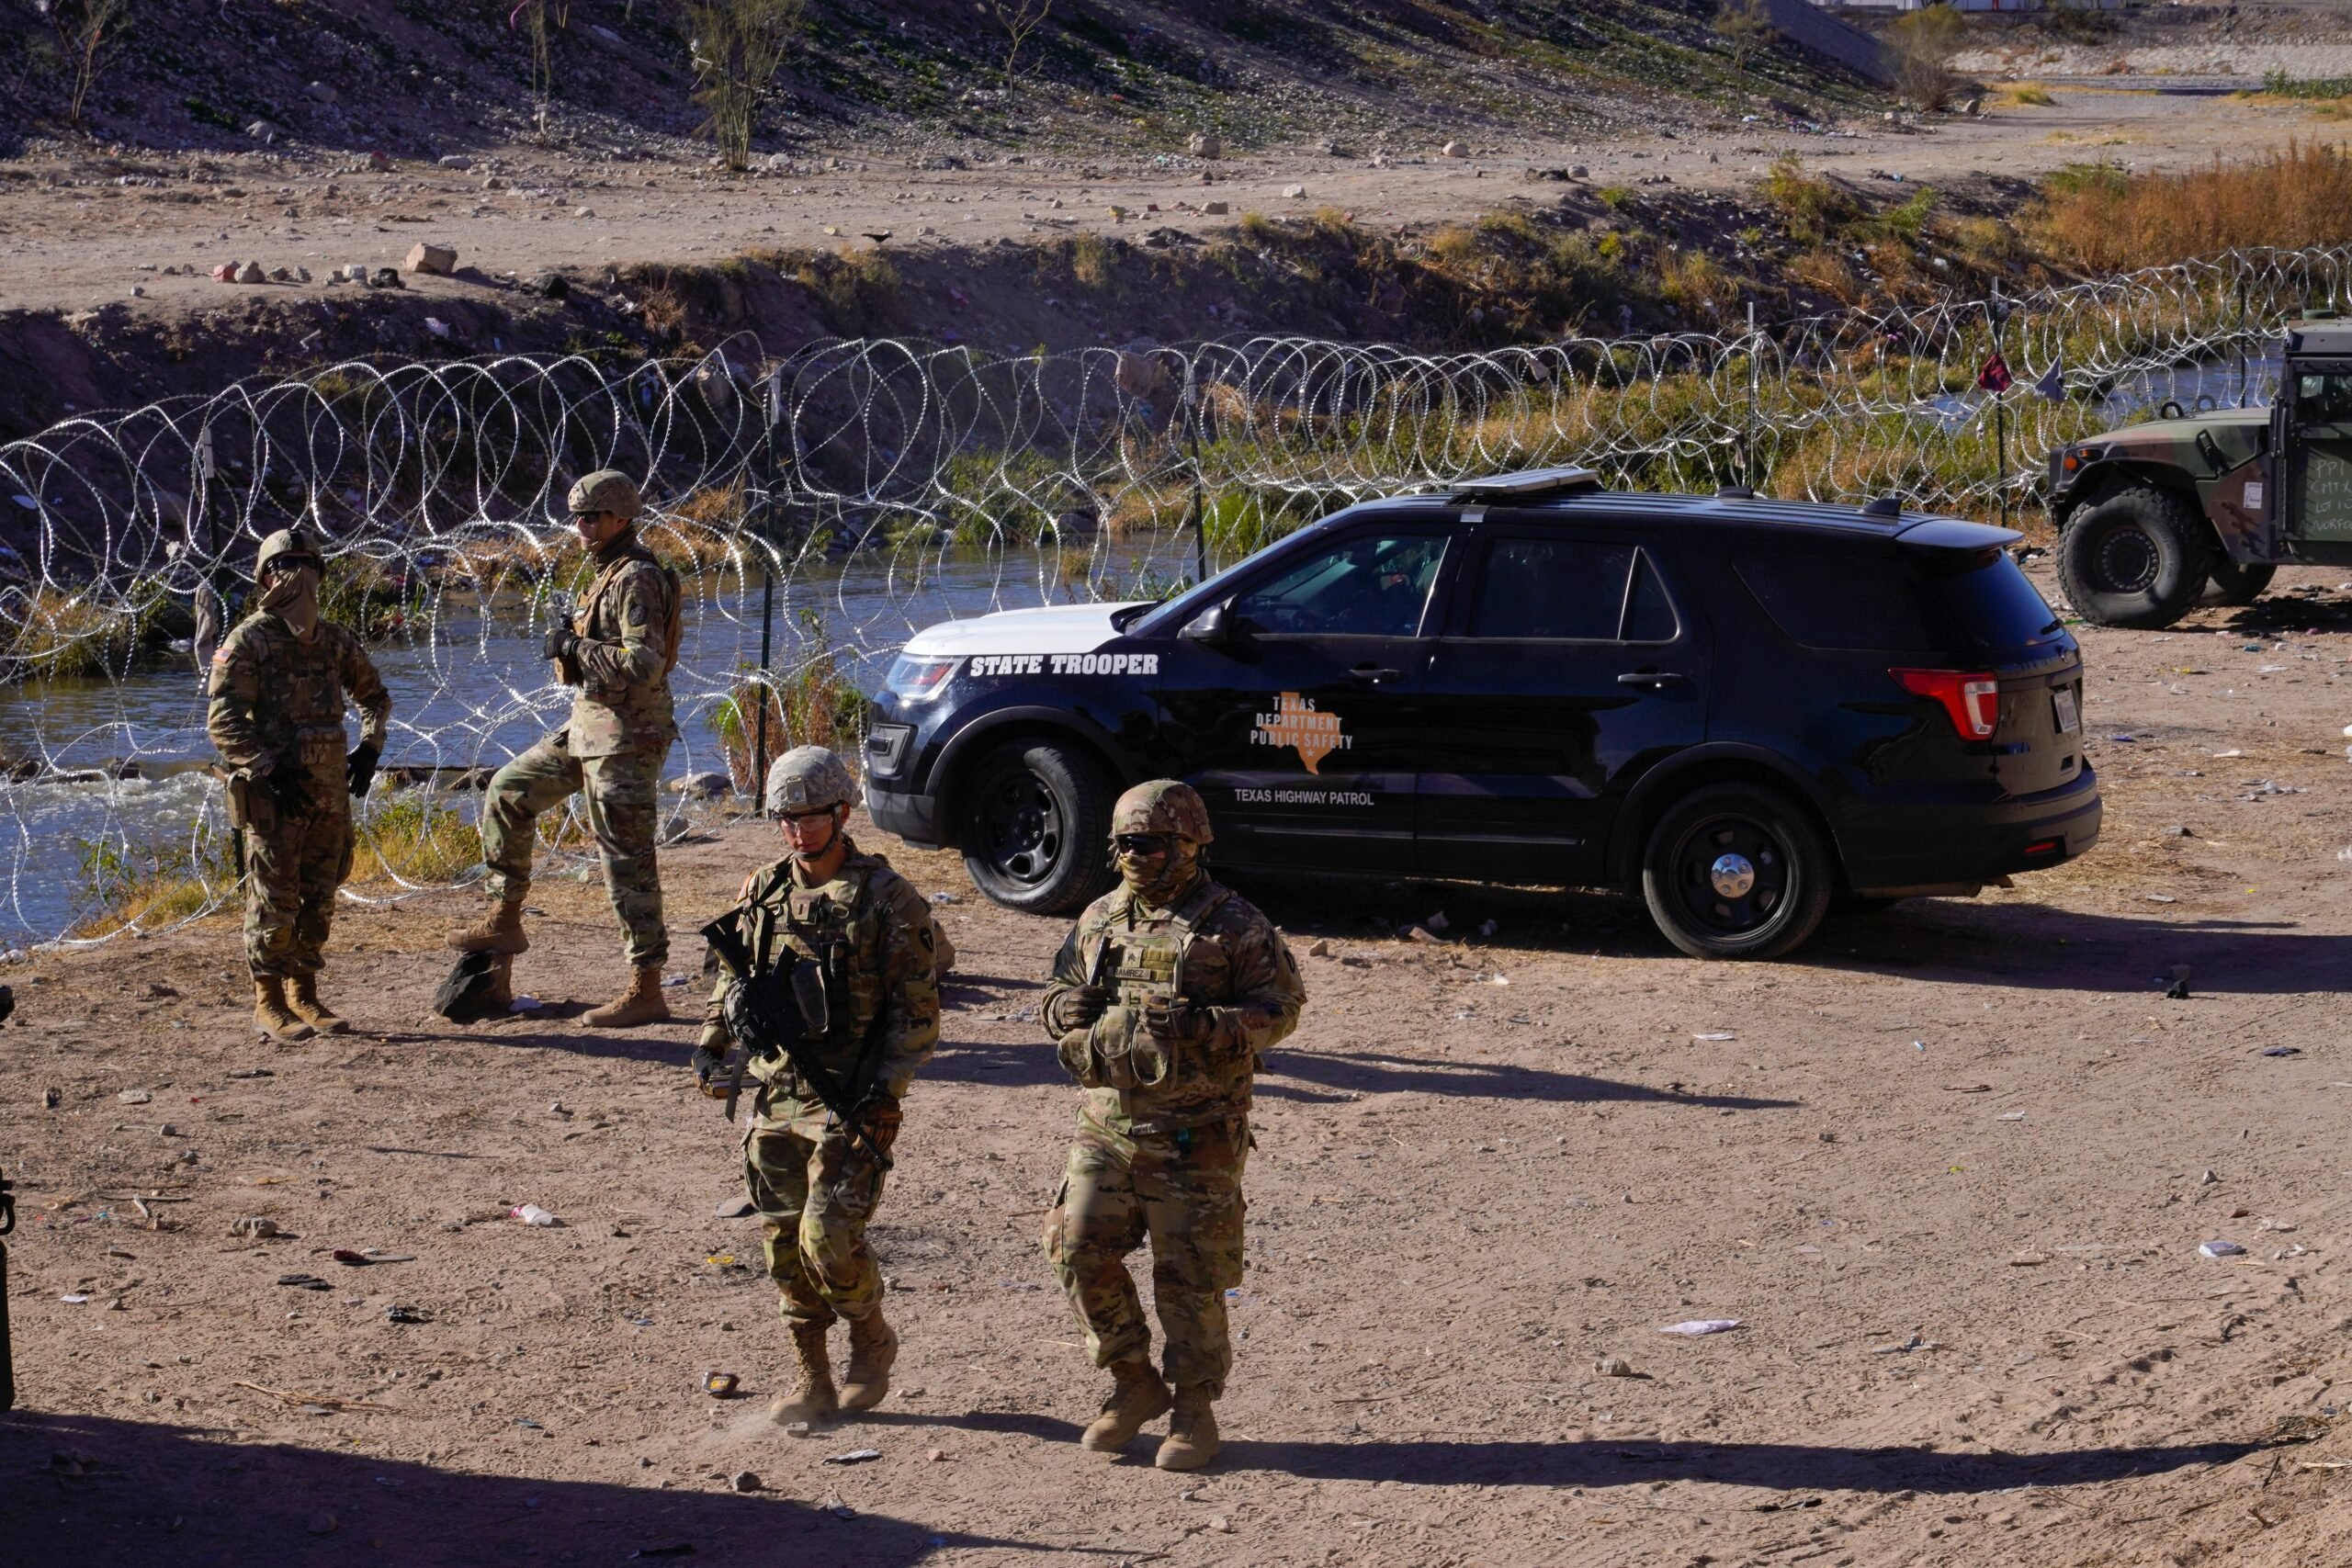 Four uniformed Texas national guard troops stand near a Texas Department of Public Safety SUV, near barbed wire which stands at the border with Mexico in El Paso.